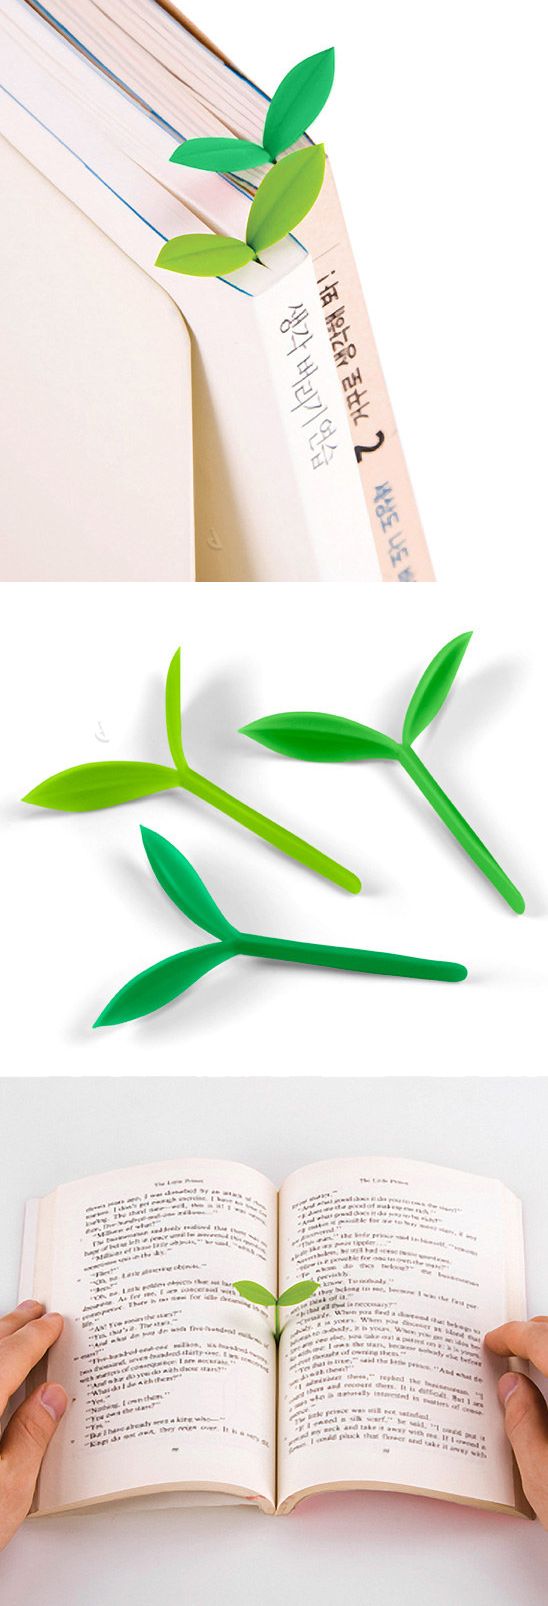 Sprout bookmark #product_design